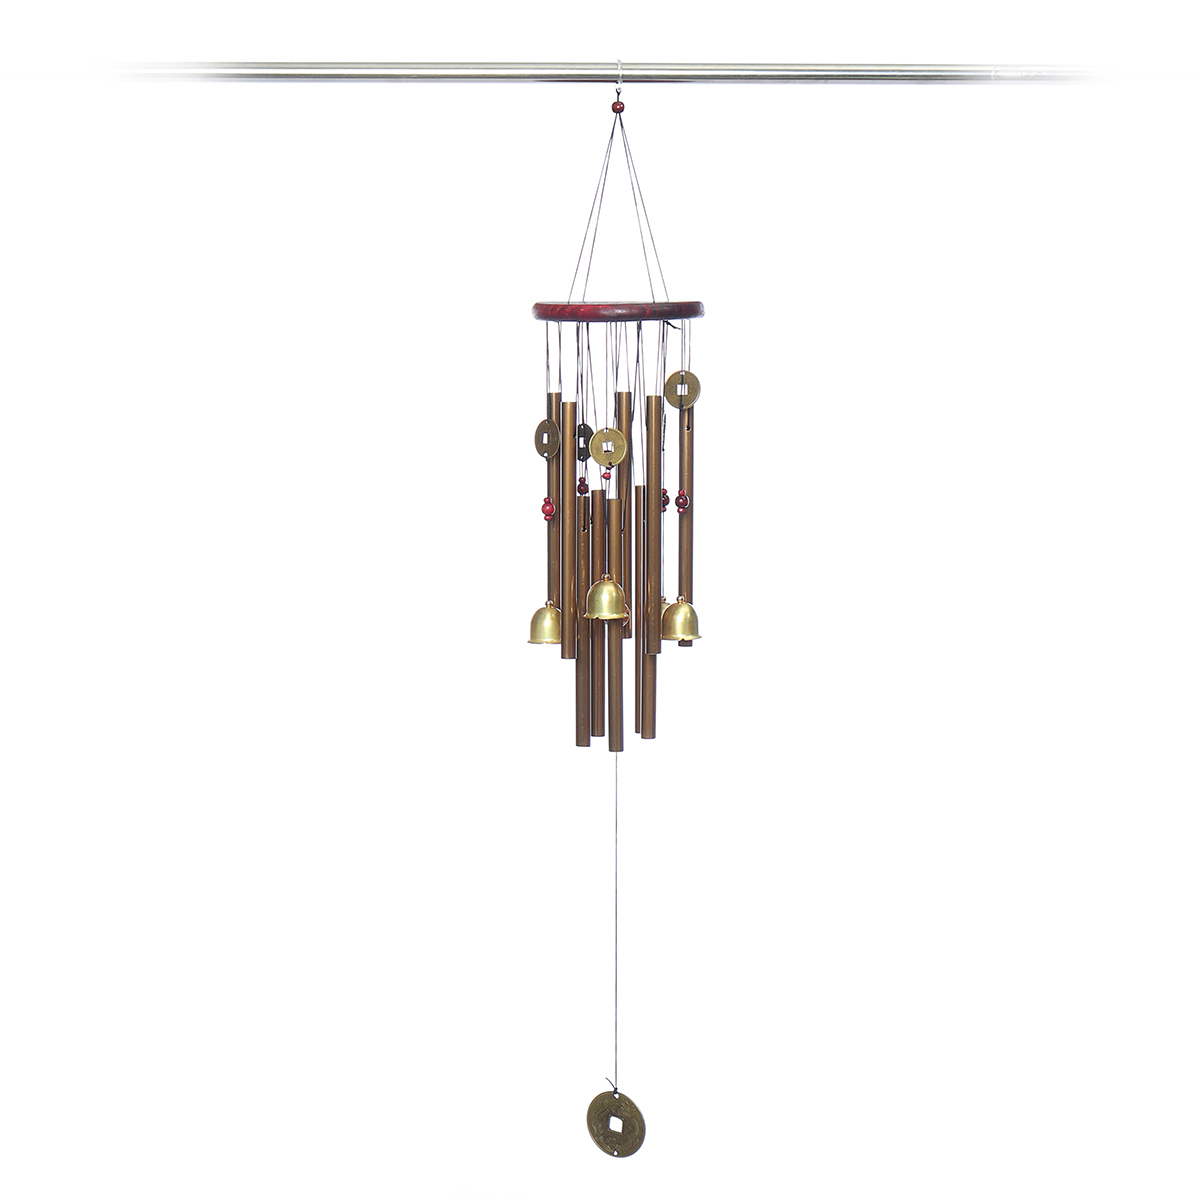 Wind-Chimes-Large-Tone-Resonant-Bell-10-Tubes-Chapel-Church-Garden-Decor-33quot-1694339-5